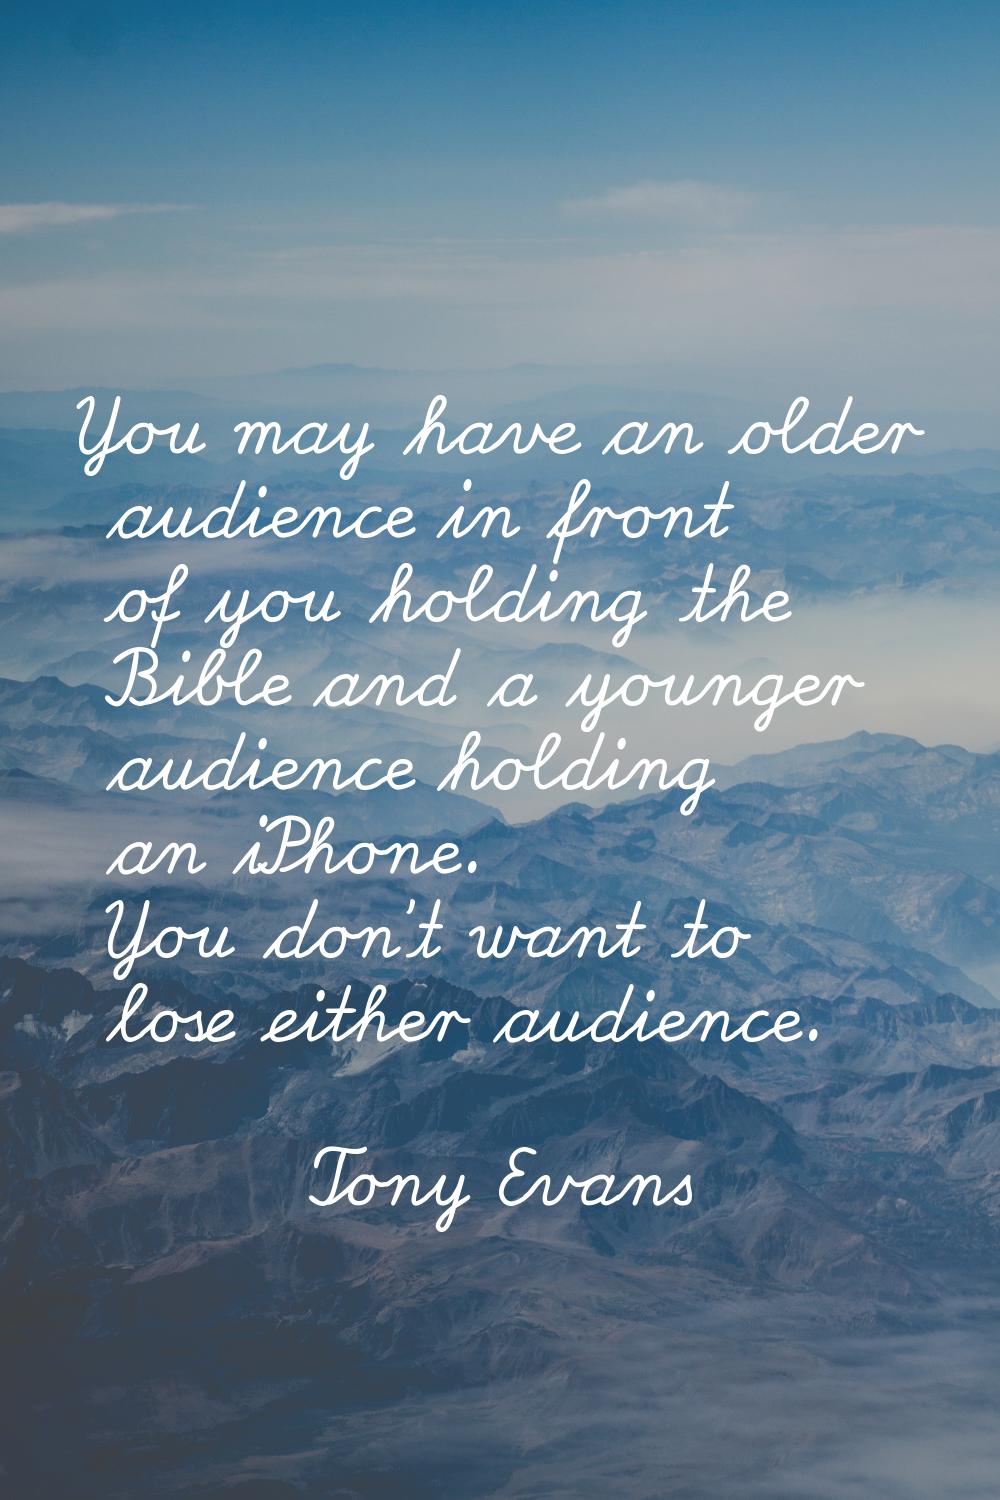 You may have an older audience in front of you holding the Bible and a younger audience holding an 